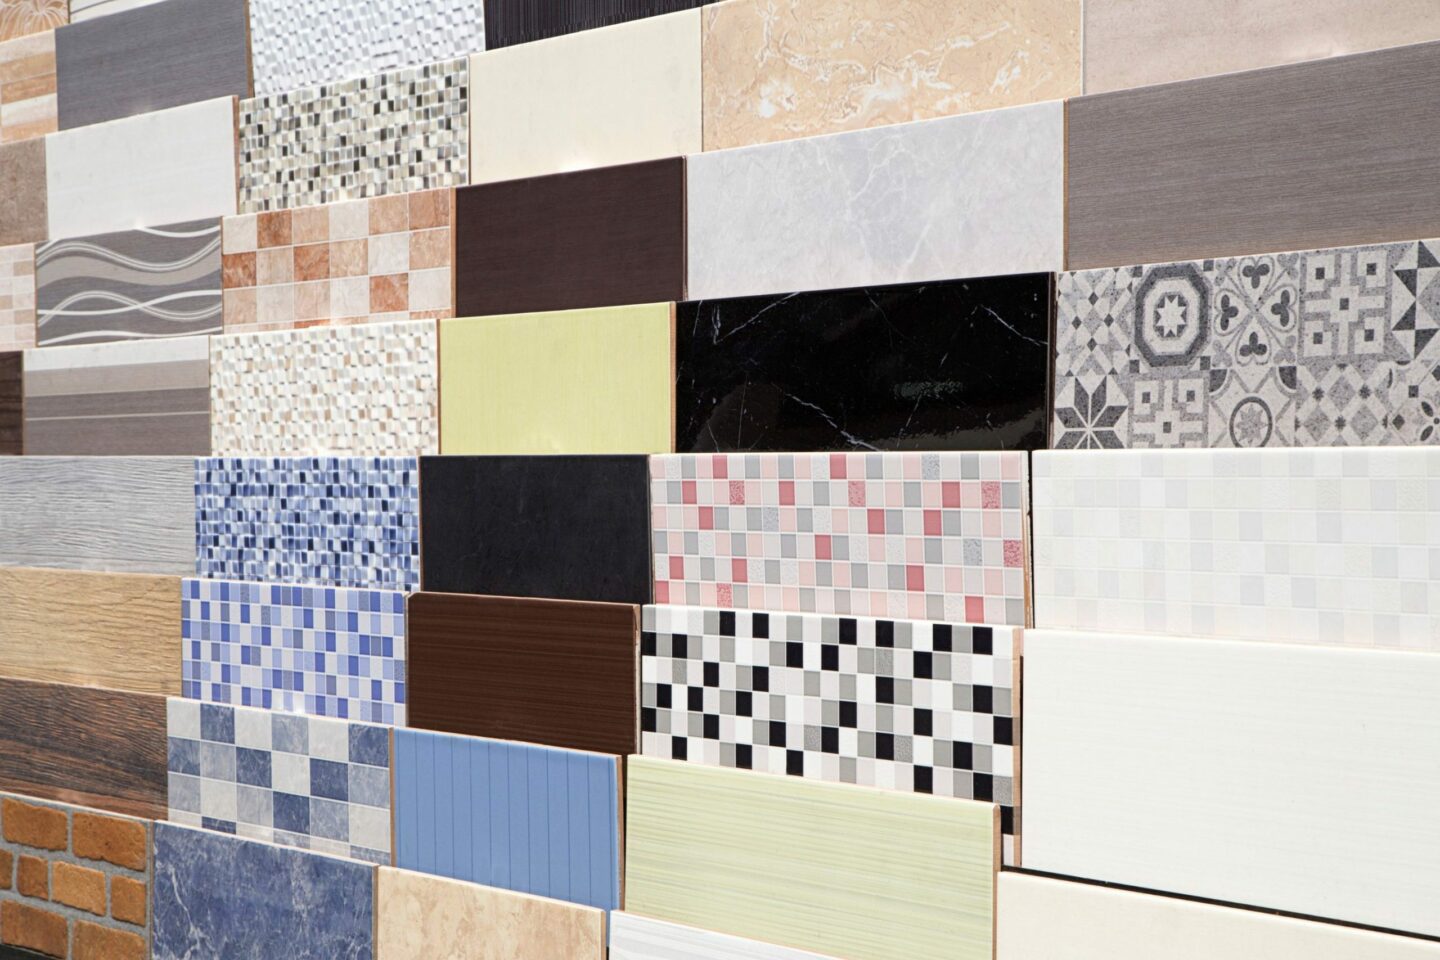 A selection of ceramic bathroom tiles of various colors, from dark, marble-like tile to a brightly-patterned